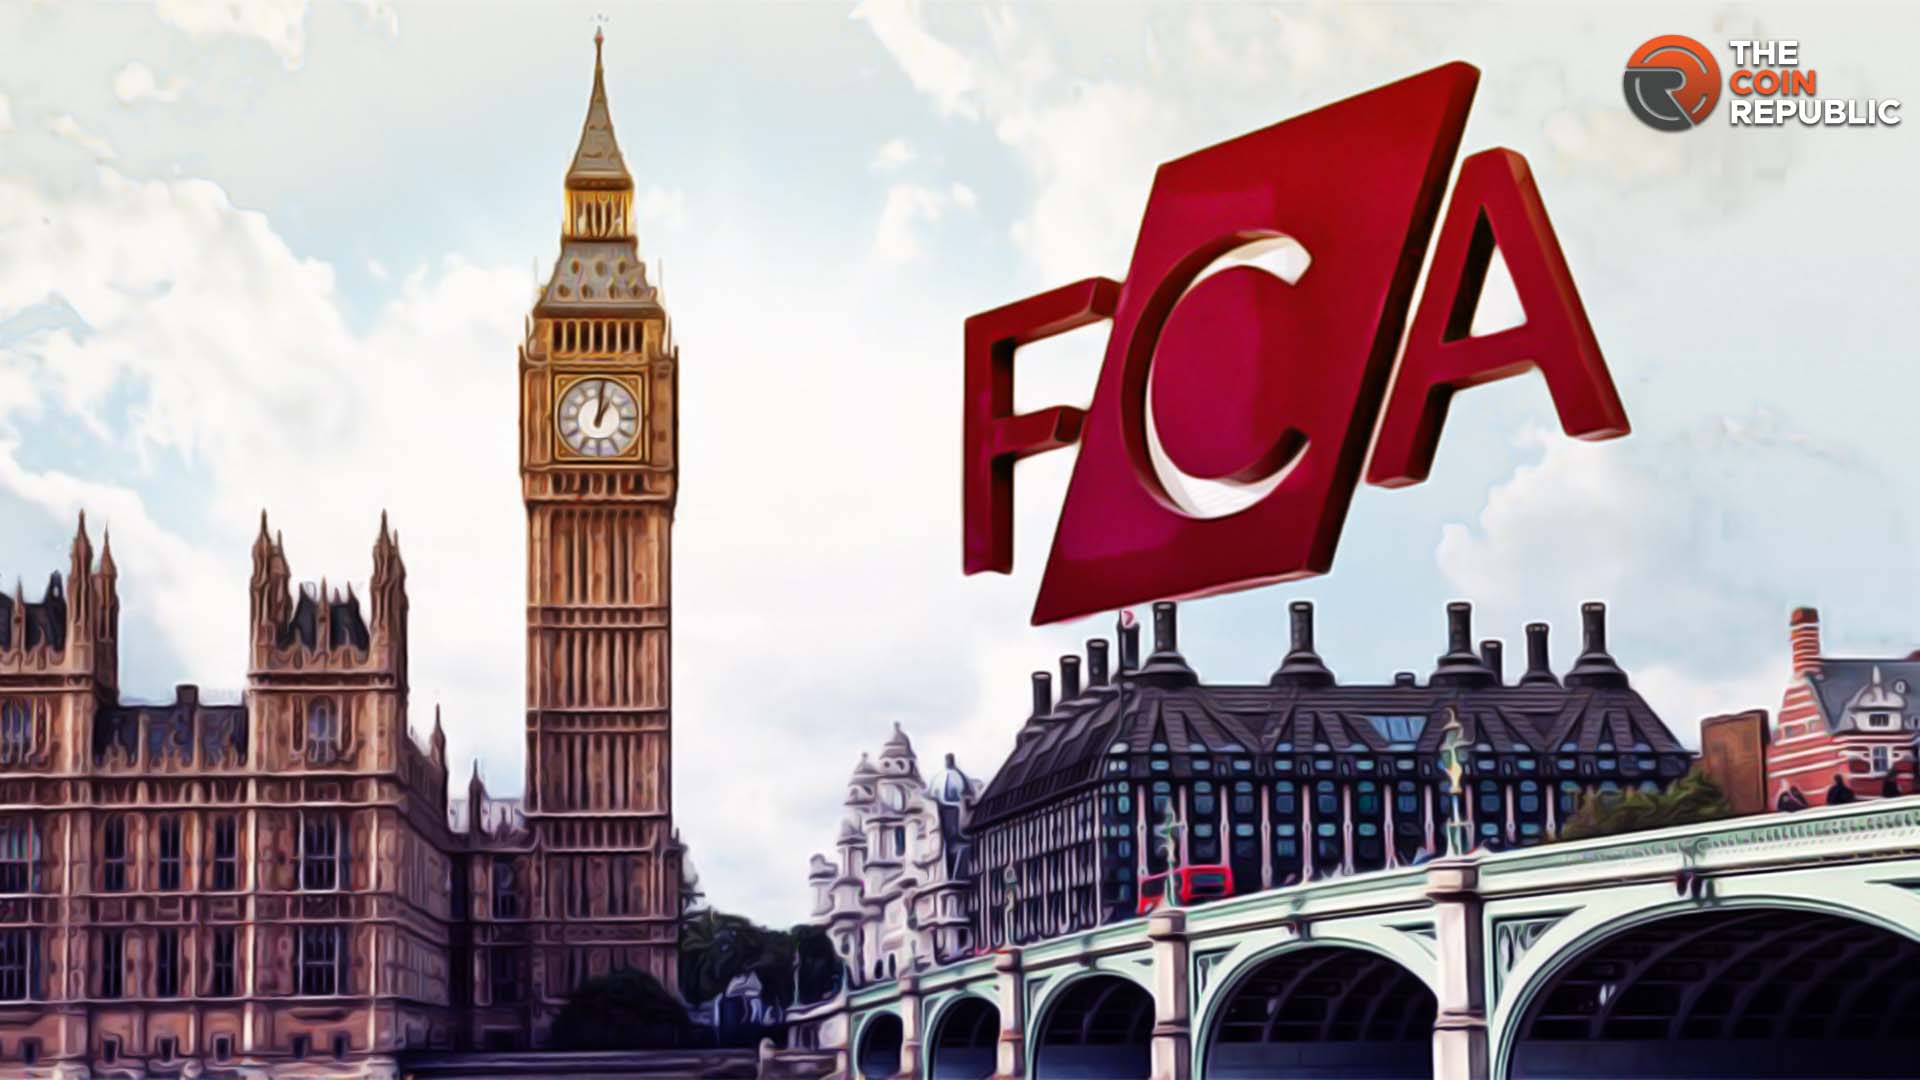 u.k. secures-regulation-on-crypto-fca-reports-it-a-high-risk-product